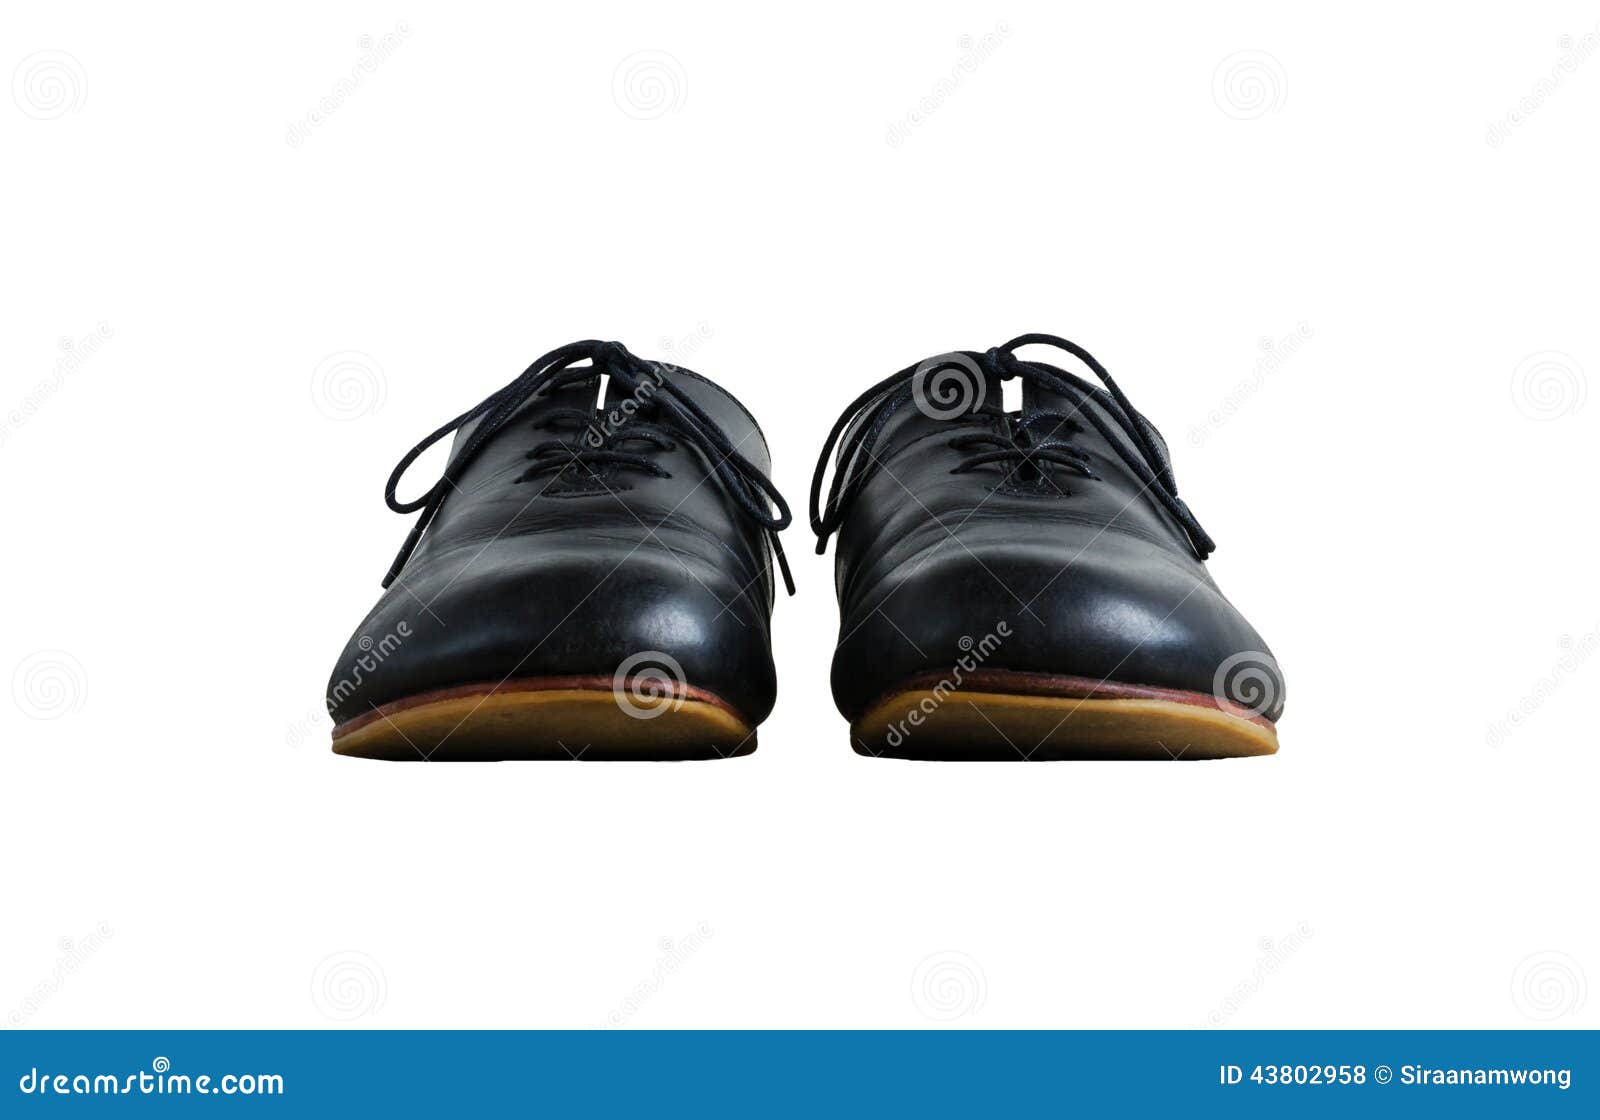 Front View Of Black Leather Shoes Isolated On White Stock Photo - Image ...